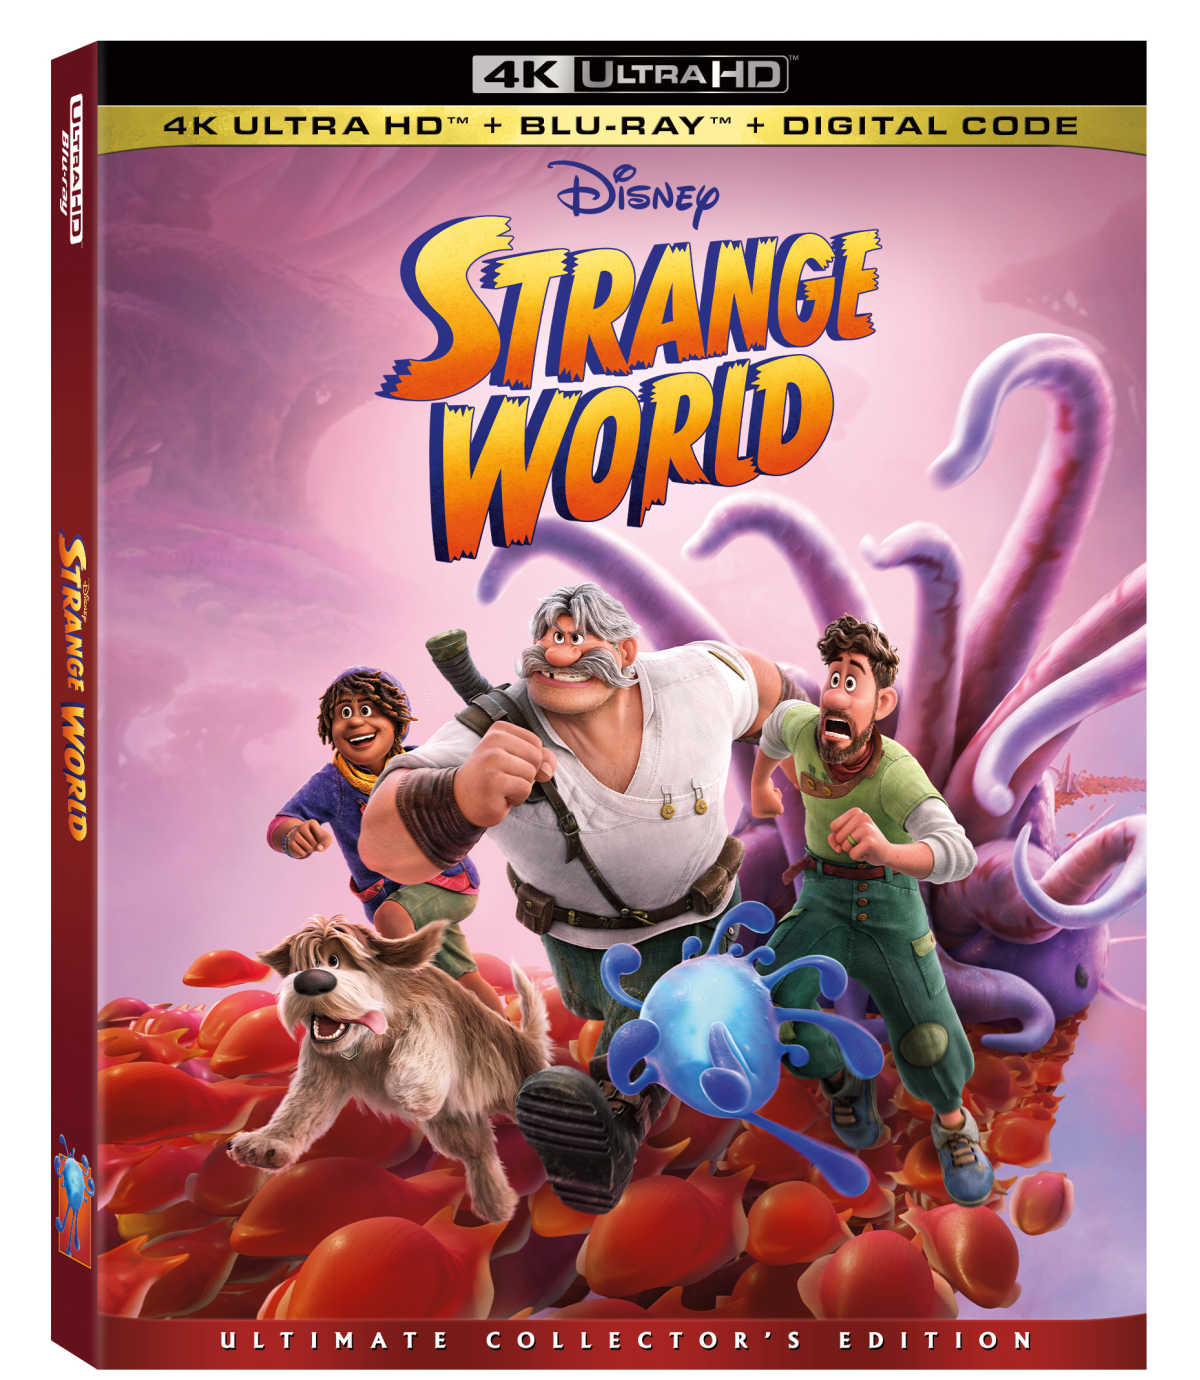 Get ready for family fun and a diverse cast of characters, when you enjoy Strange World from Disney Animation. 